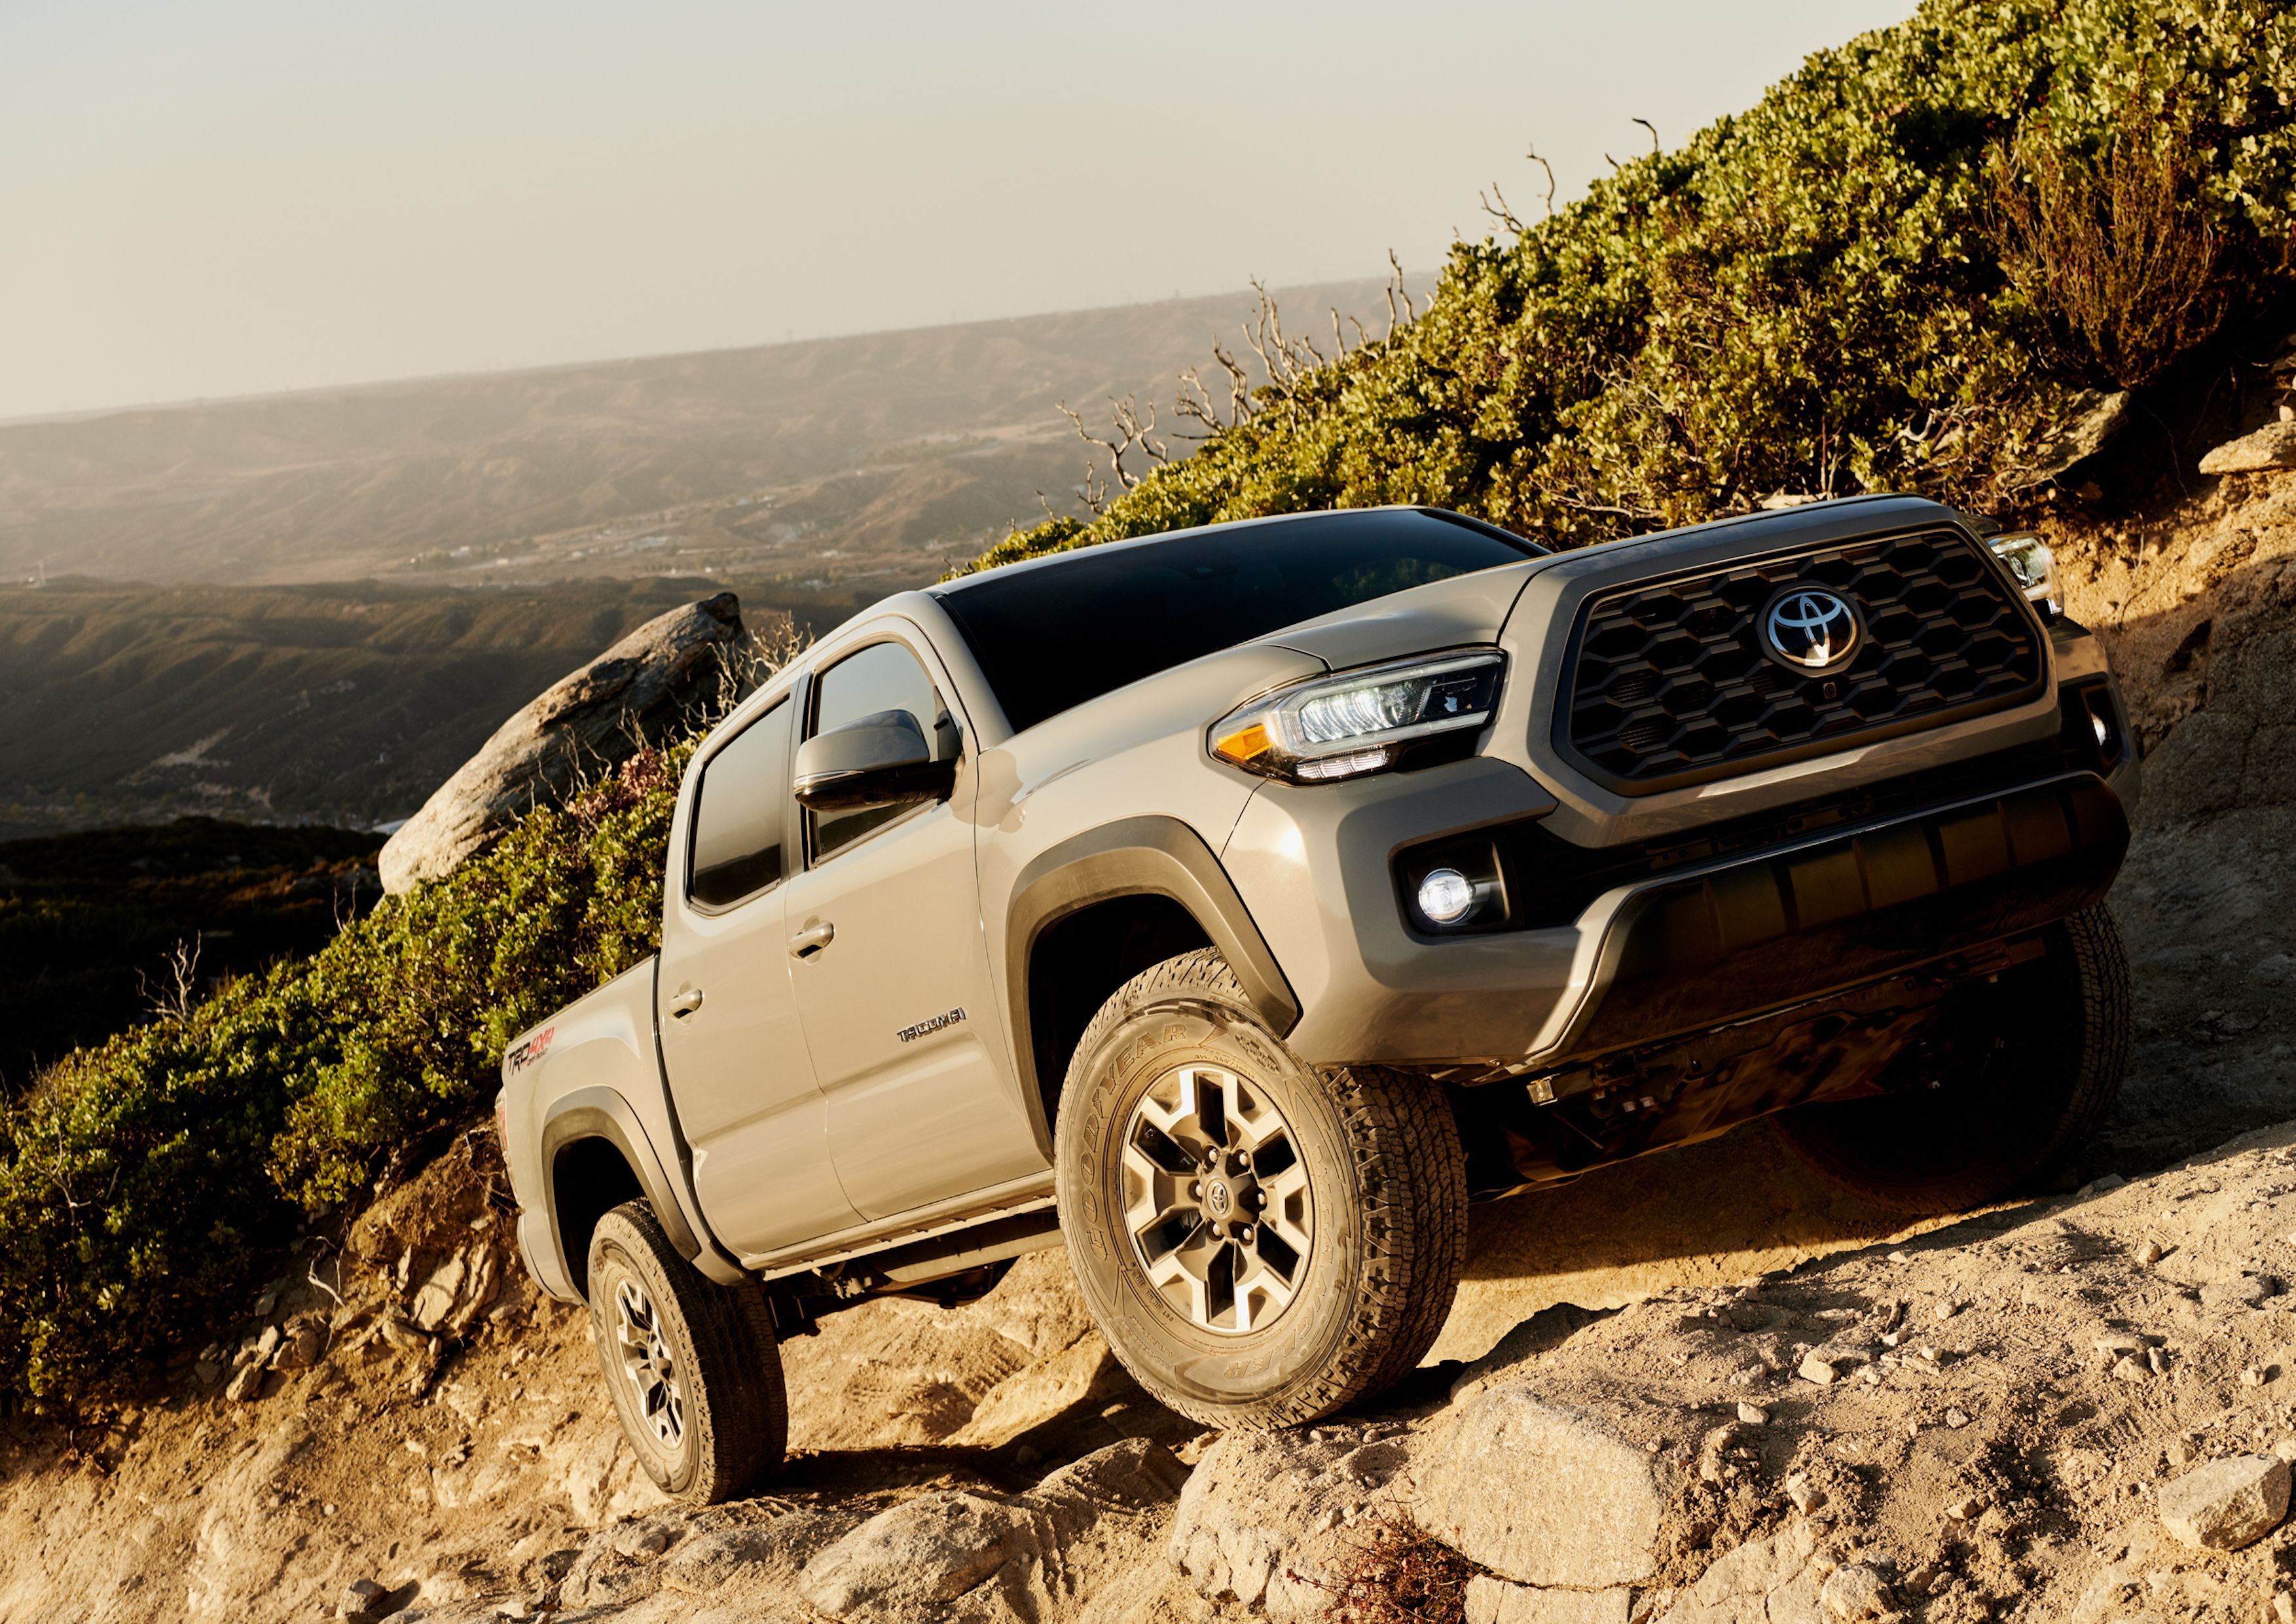 2020 - 2021 Toyota Has Hiked The Prices of The 2020 Tacoma And It Has Gotten All The More Dearer Now 